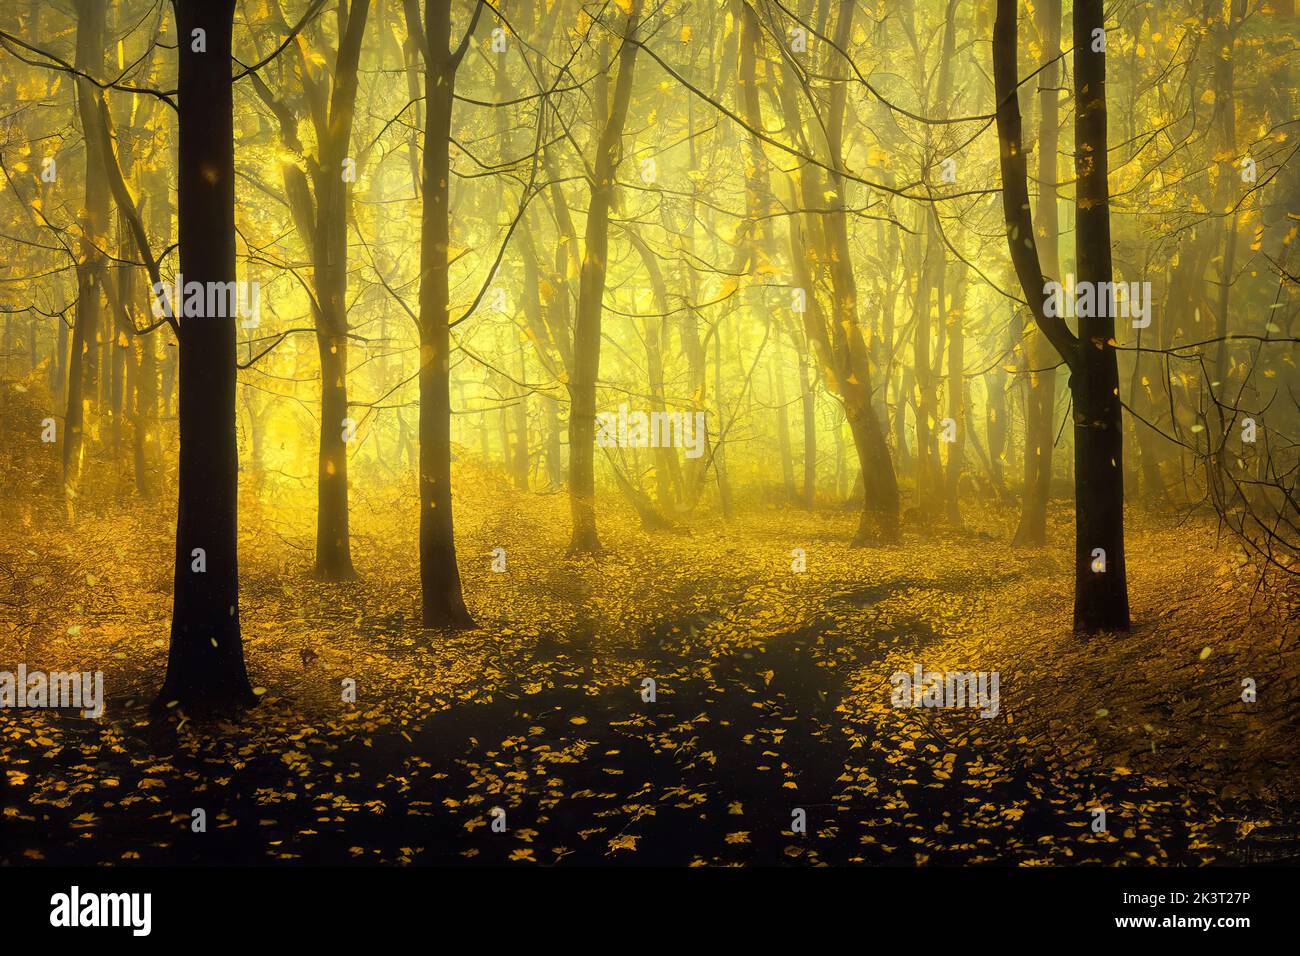 Autumn in an enchanted forest, mysterious golden fog, falling yellow leaves. Digital 3D illustration Stock Photo